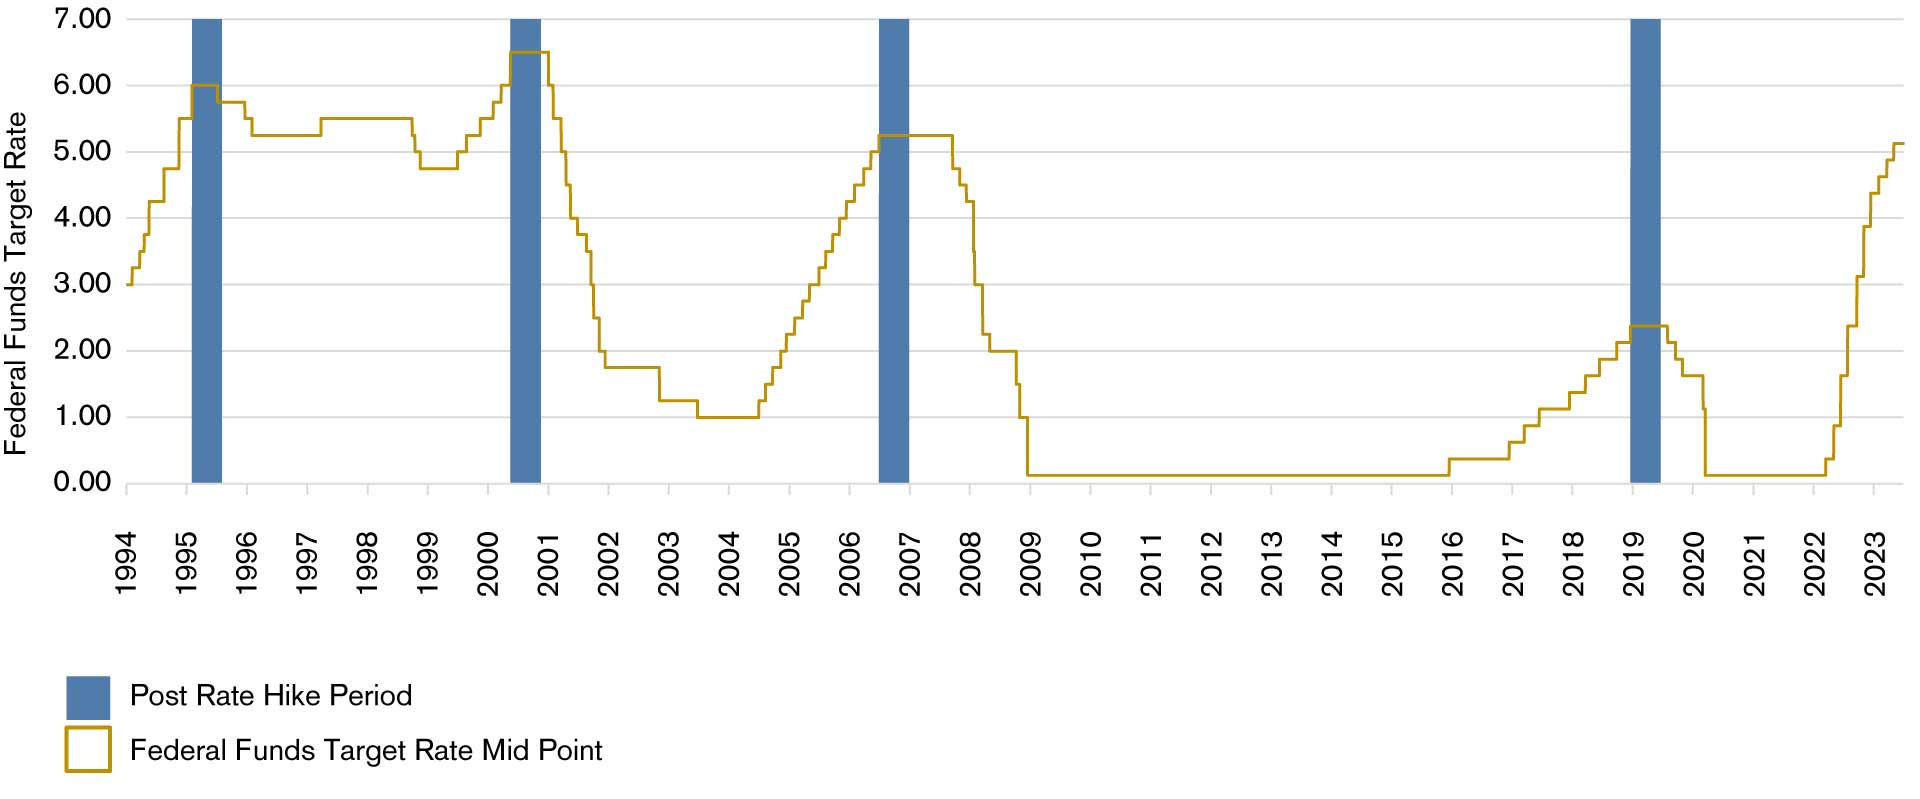 Chart 1: Development of the Federal Funds target rate (mid point) and the period following the day of the last hike